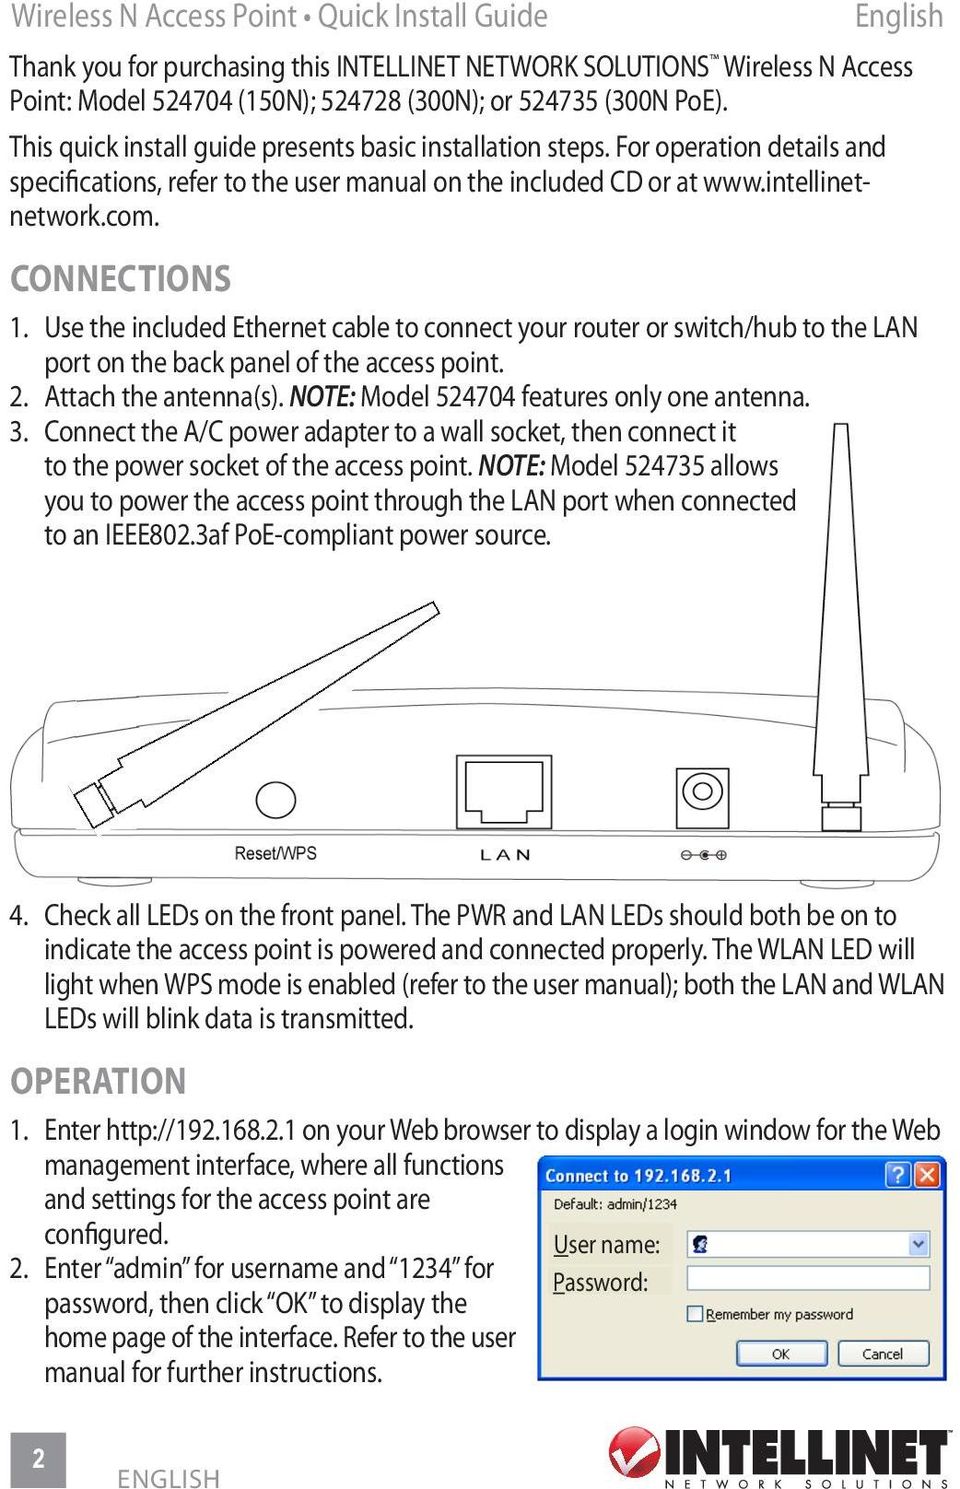 Use the included Ethernet cable to connect your router or switch/hub to the LAN port on the back panel of the access point. 2. Attach the antenna(s). NOTE: Model 524704 features only one antenna. 3.